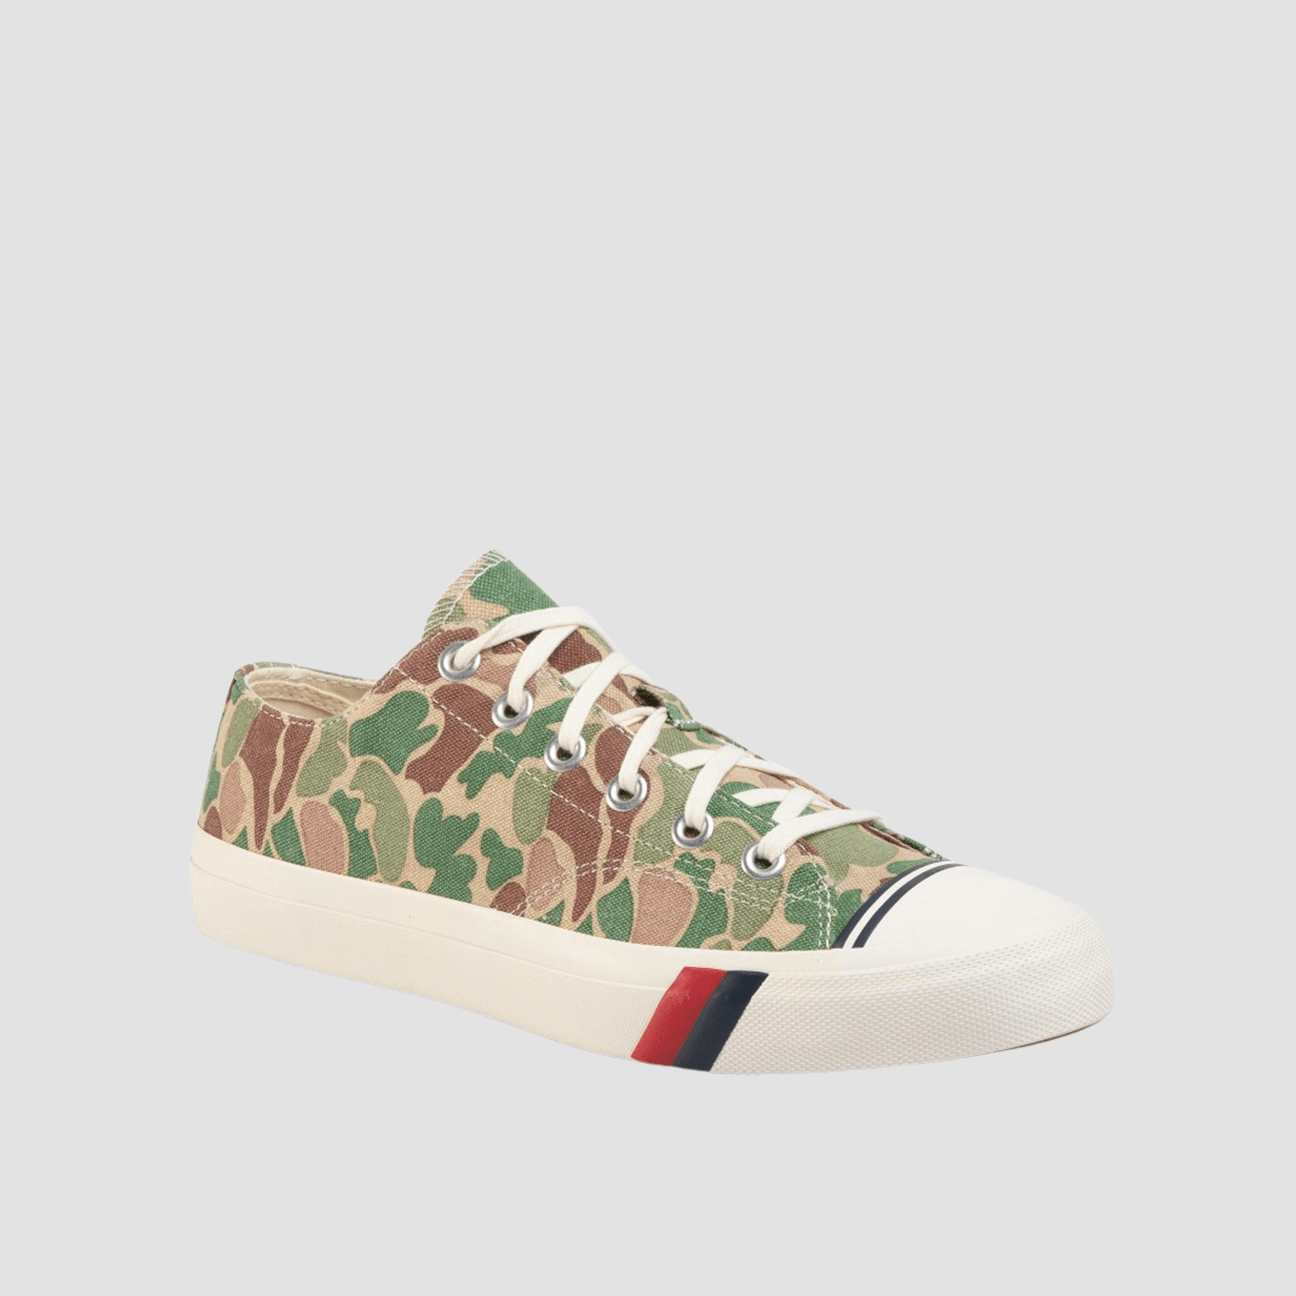 PRO KEDS Sneakers Rock Lo Royal Camo Olive